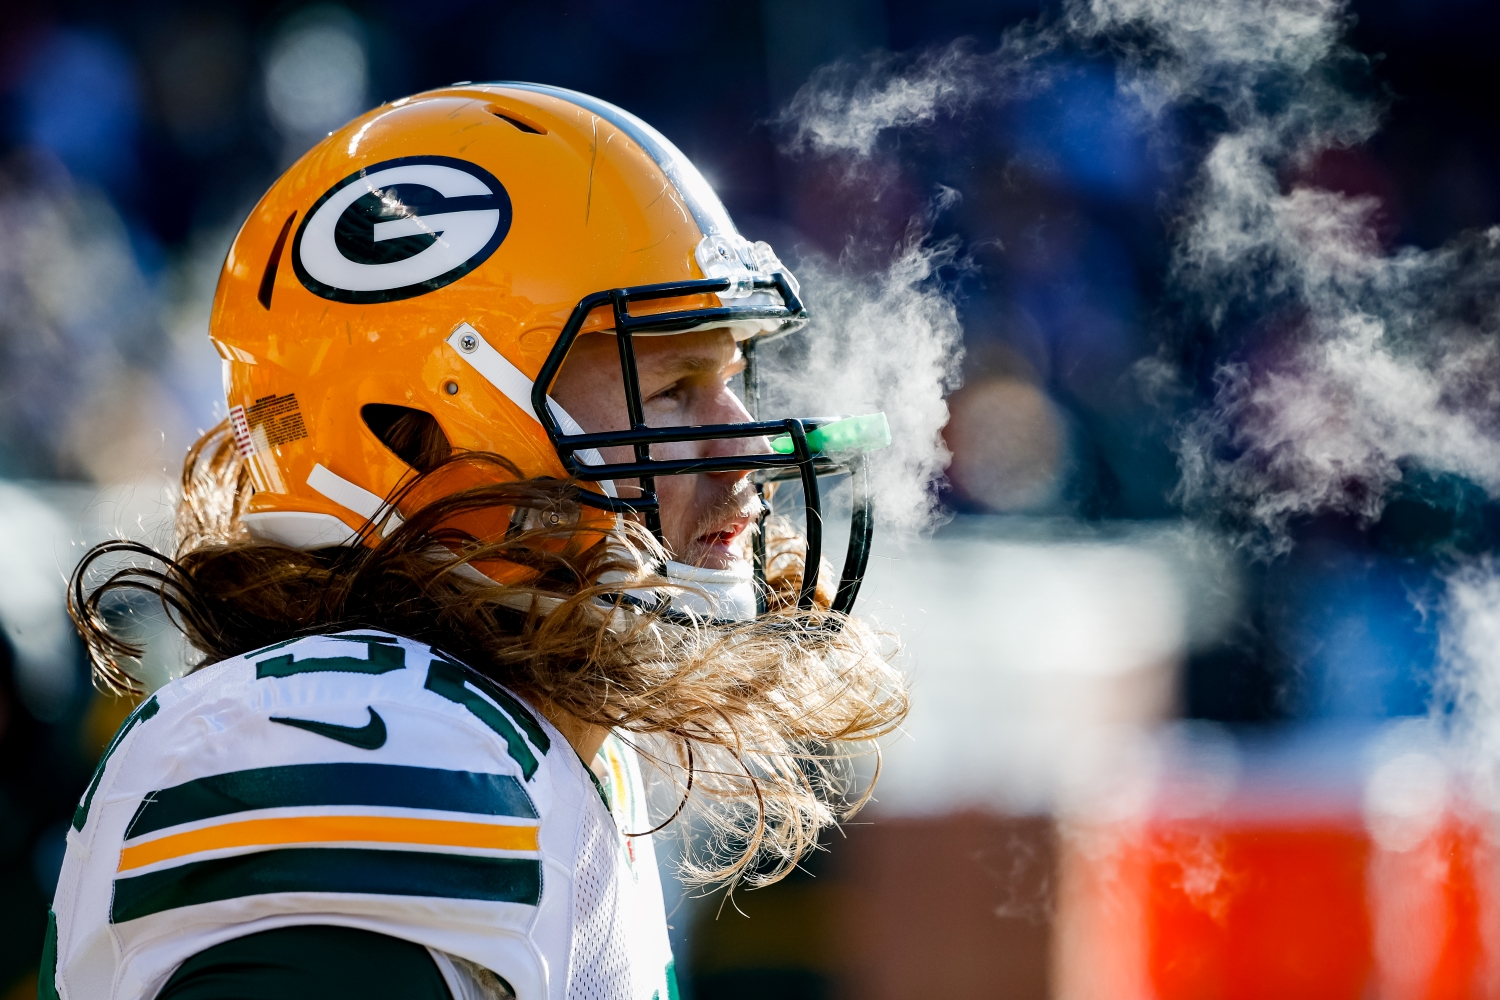 Green Bay Packers linebacker Clay Matthews stands on the field during a game against the Chicago Bears.